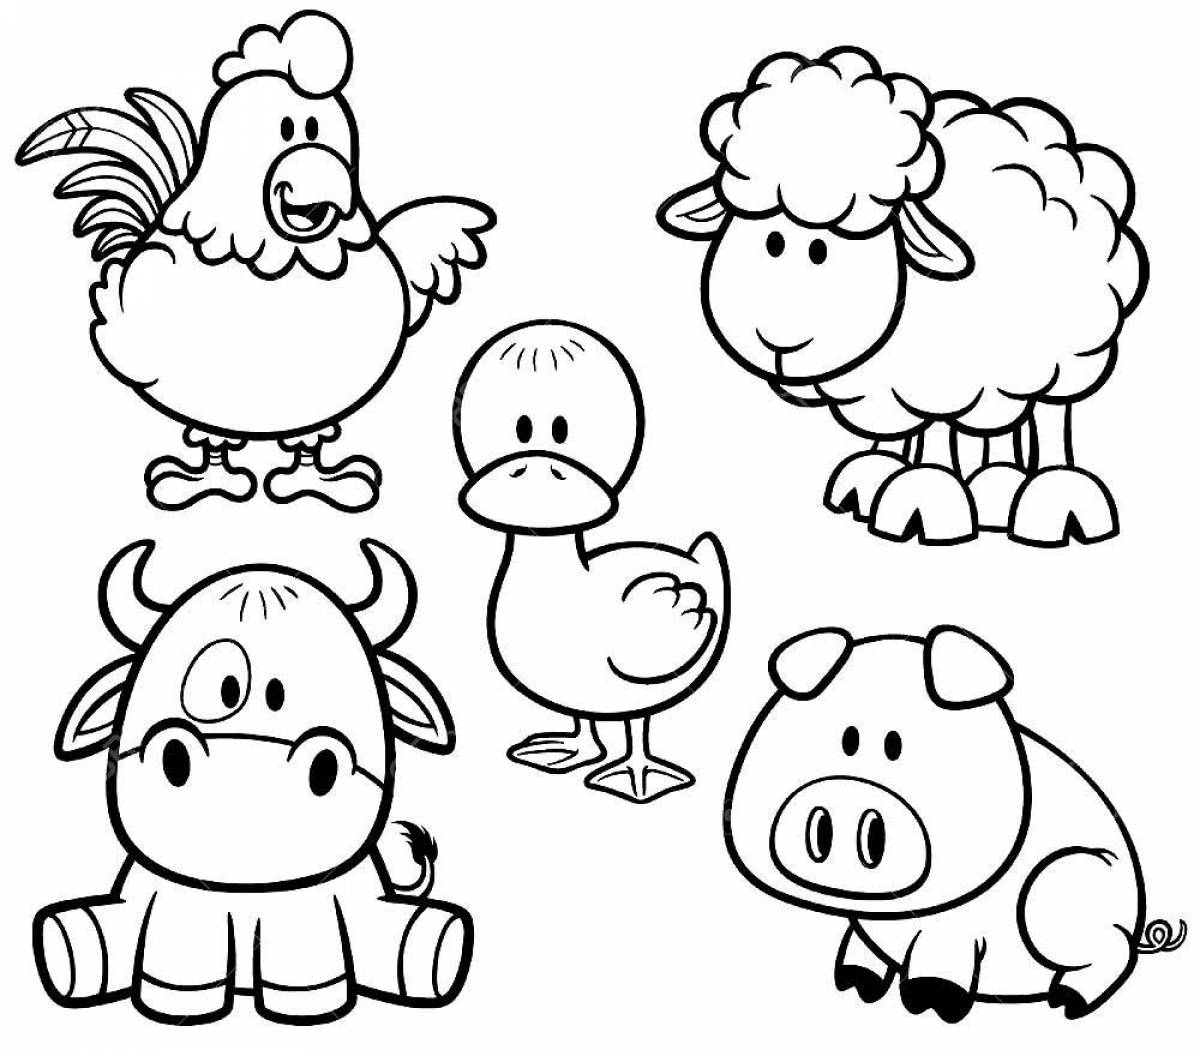 Coloring pages of pets for children 3-4 years old